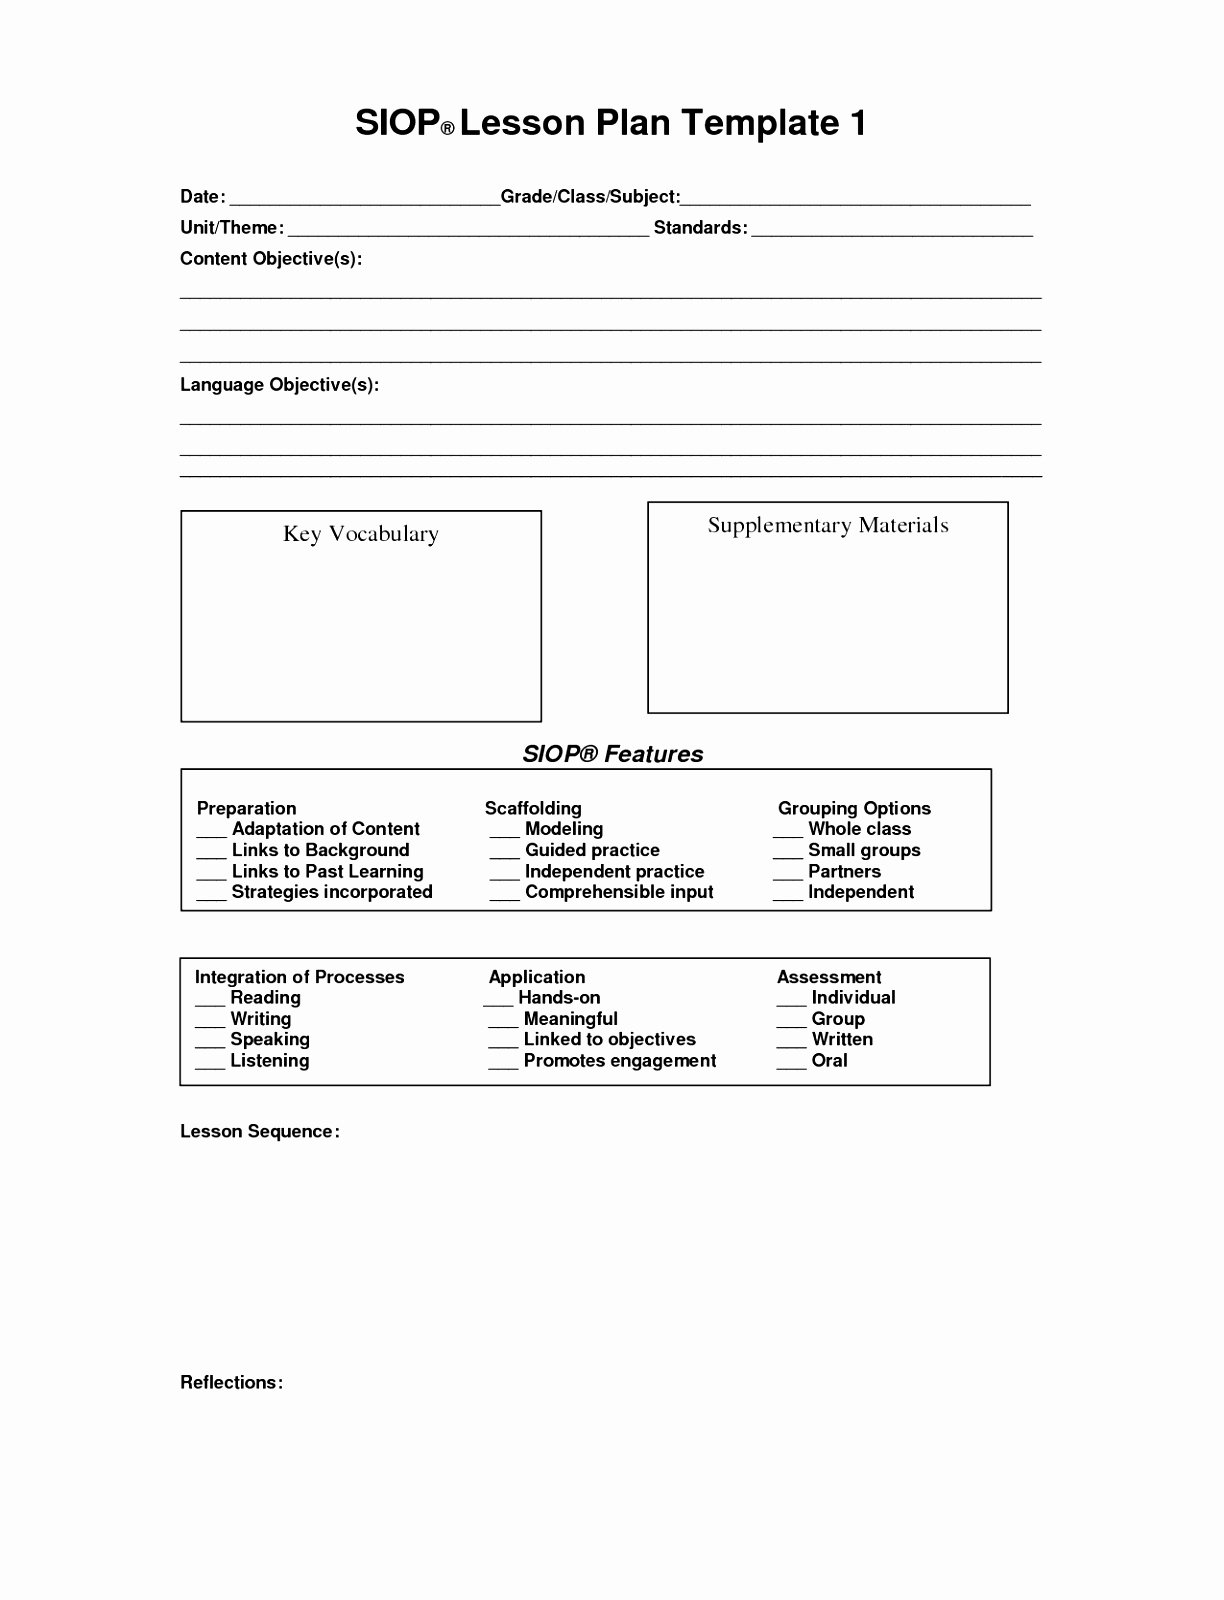 7 Siop Lesson Plan Template 3 Tauay